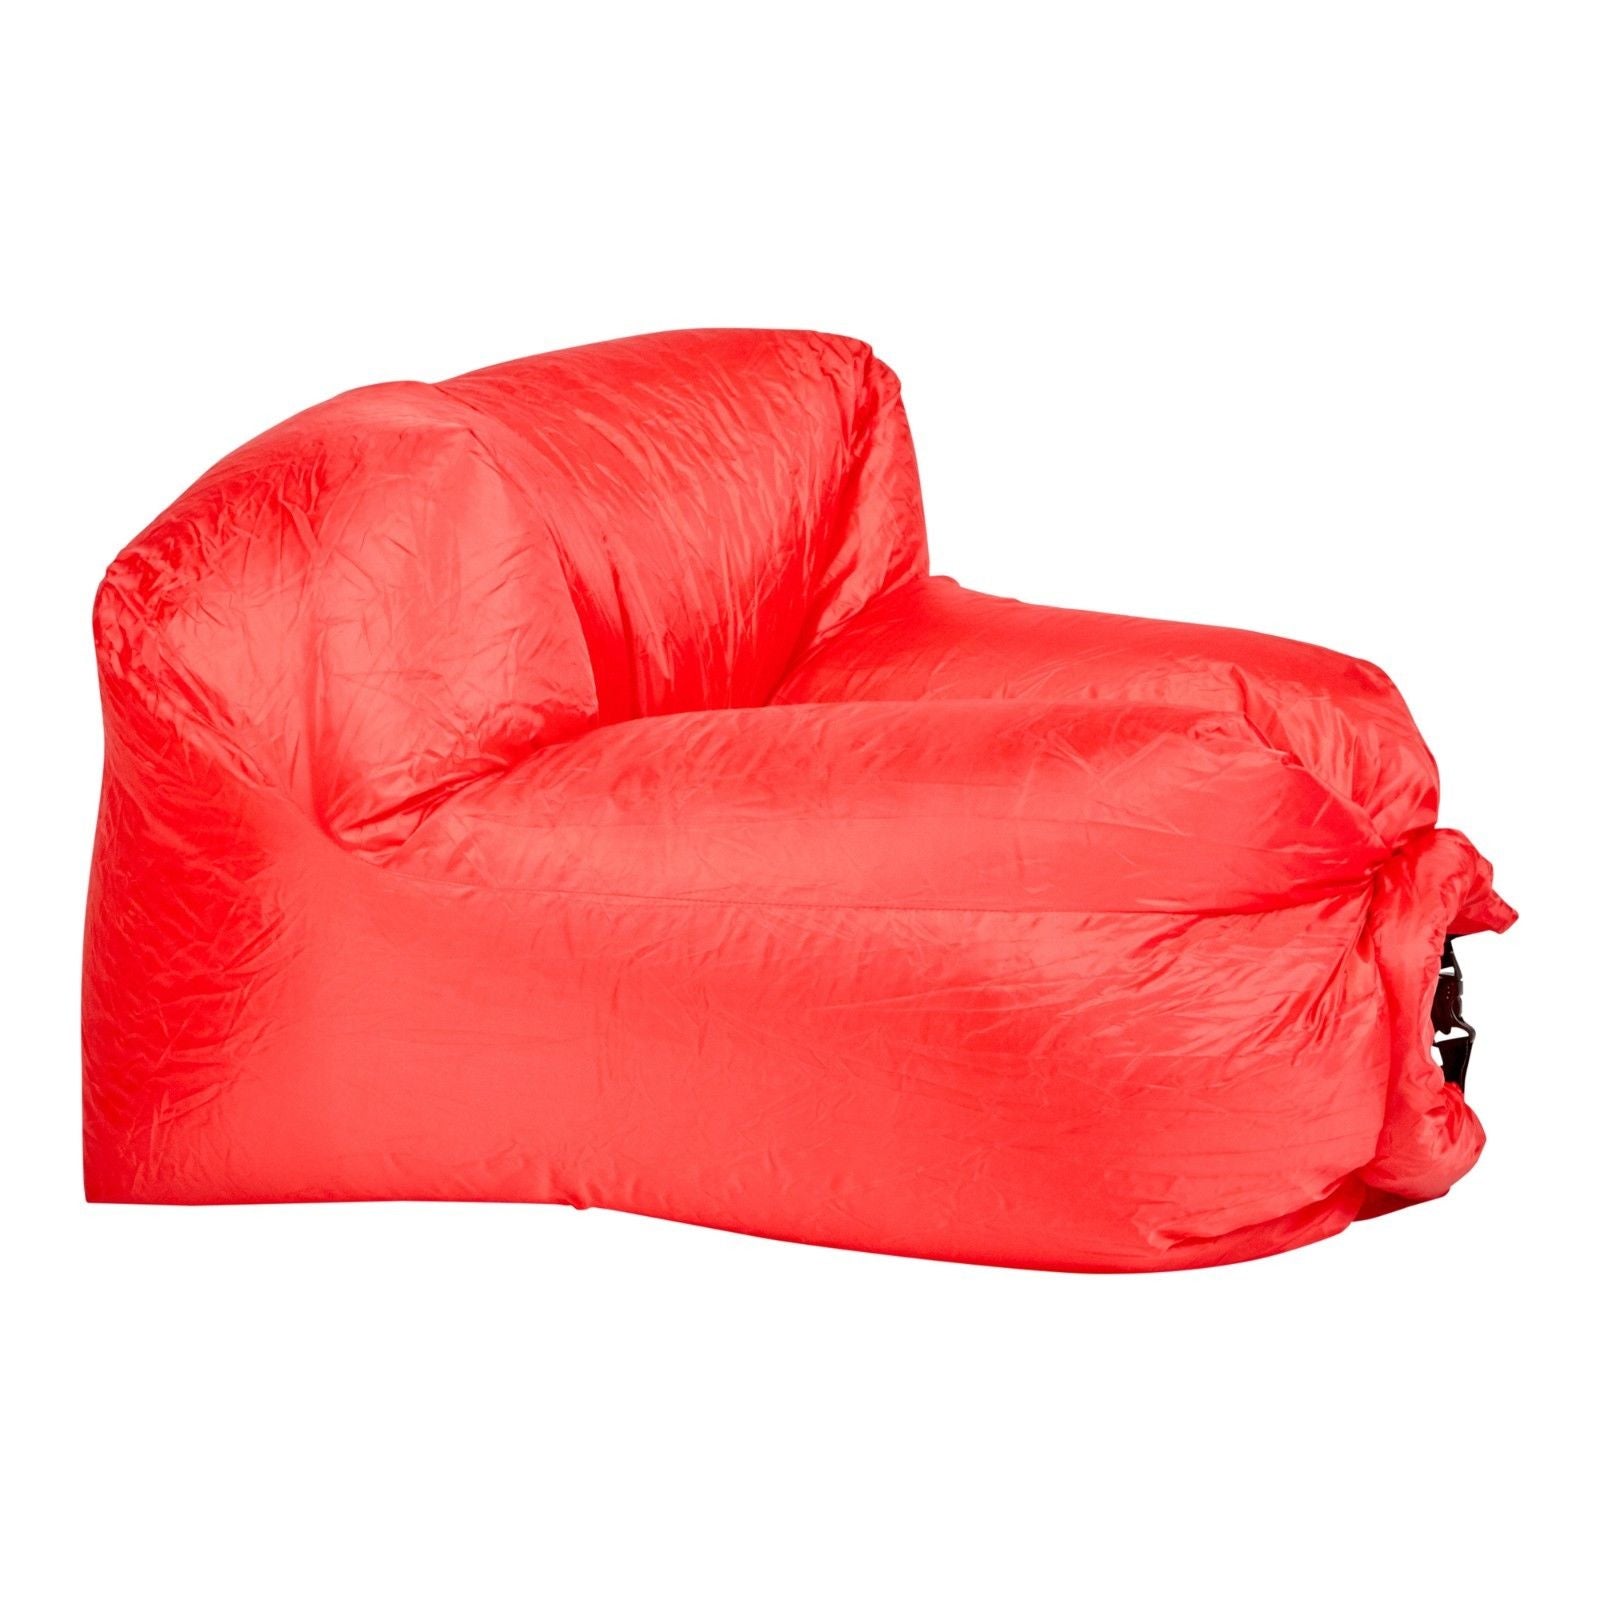 Milano Decor Inflatable Air Lounger